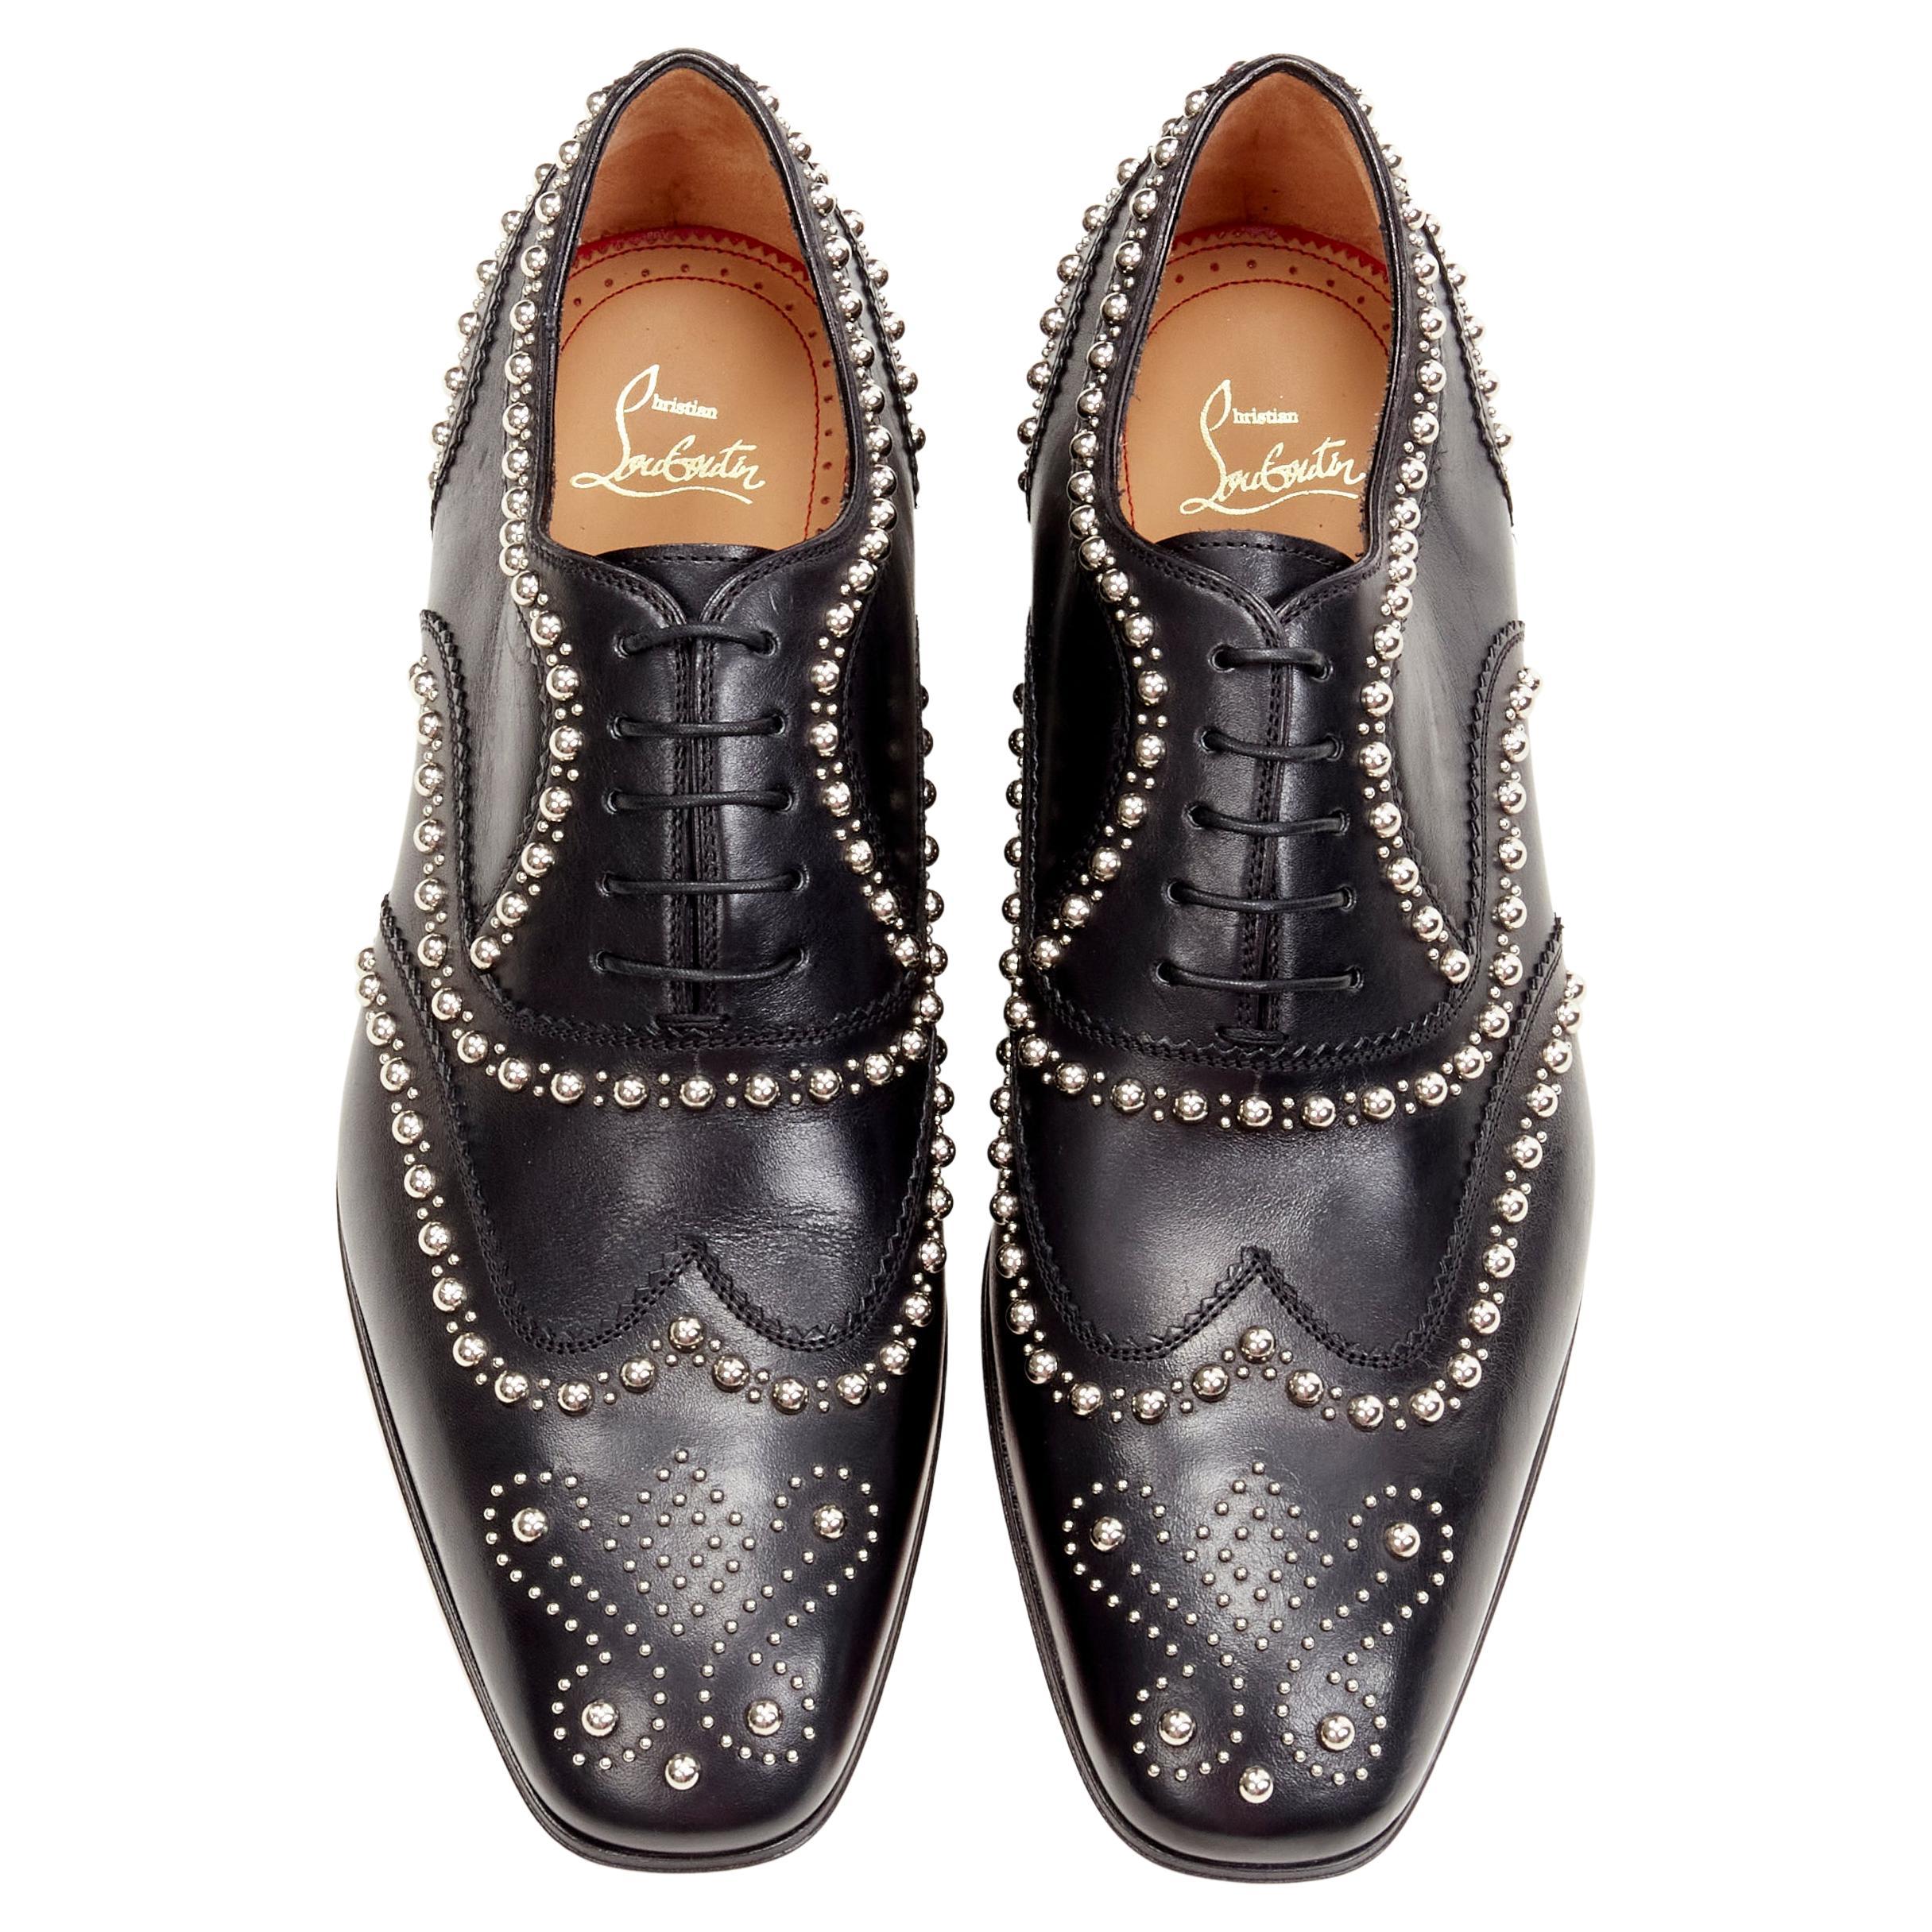 new CHRISTIAN LOUBOUTIN Charlie Clou black silver studded oxford brogue EU44
Brand: Christian Louboutin
Model: Charlie Clou
Extra Detail: Black leather with silver-tone dome stud embellishent. Waxed laces. Stacked wooden heel.

CONDITION:
Condition: